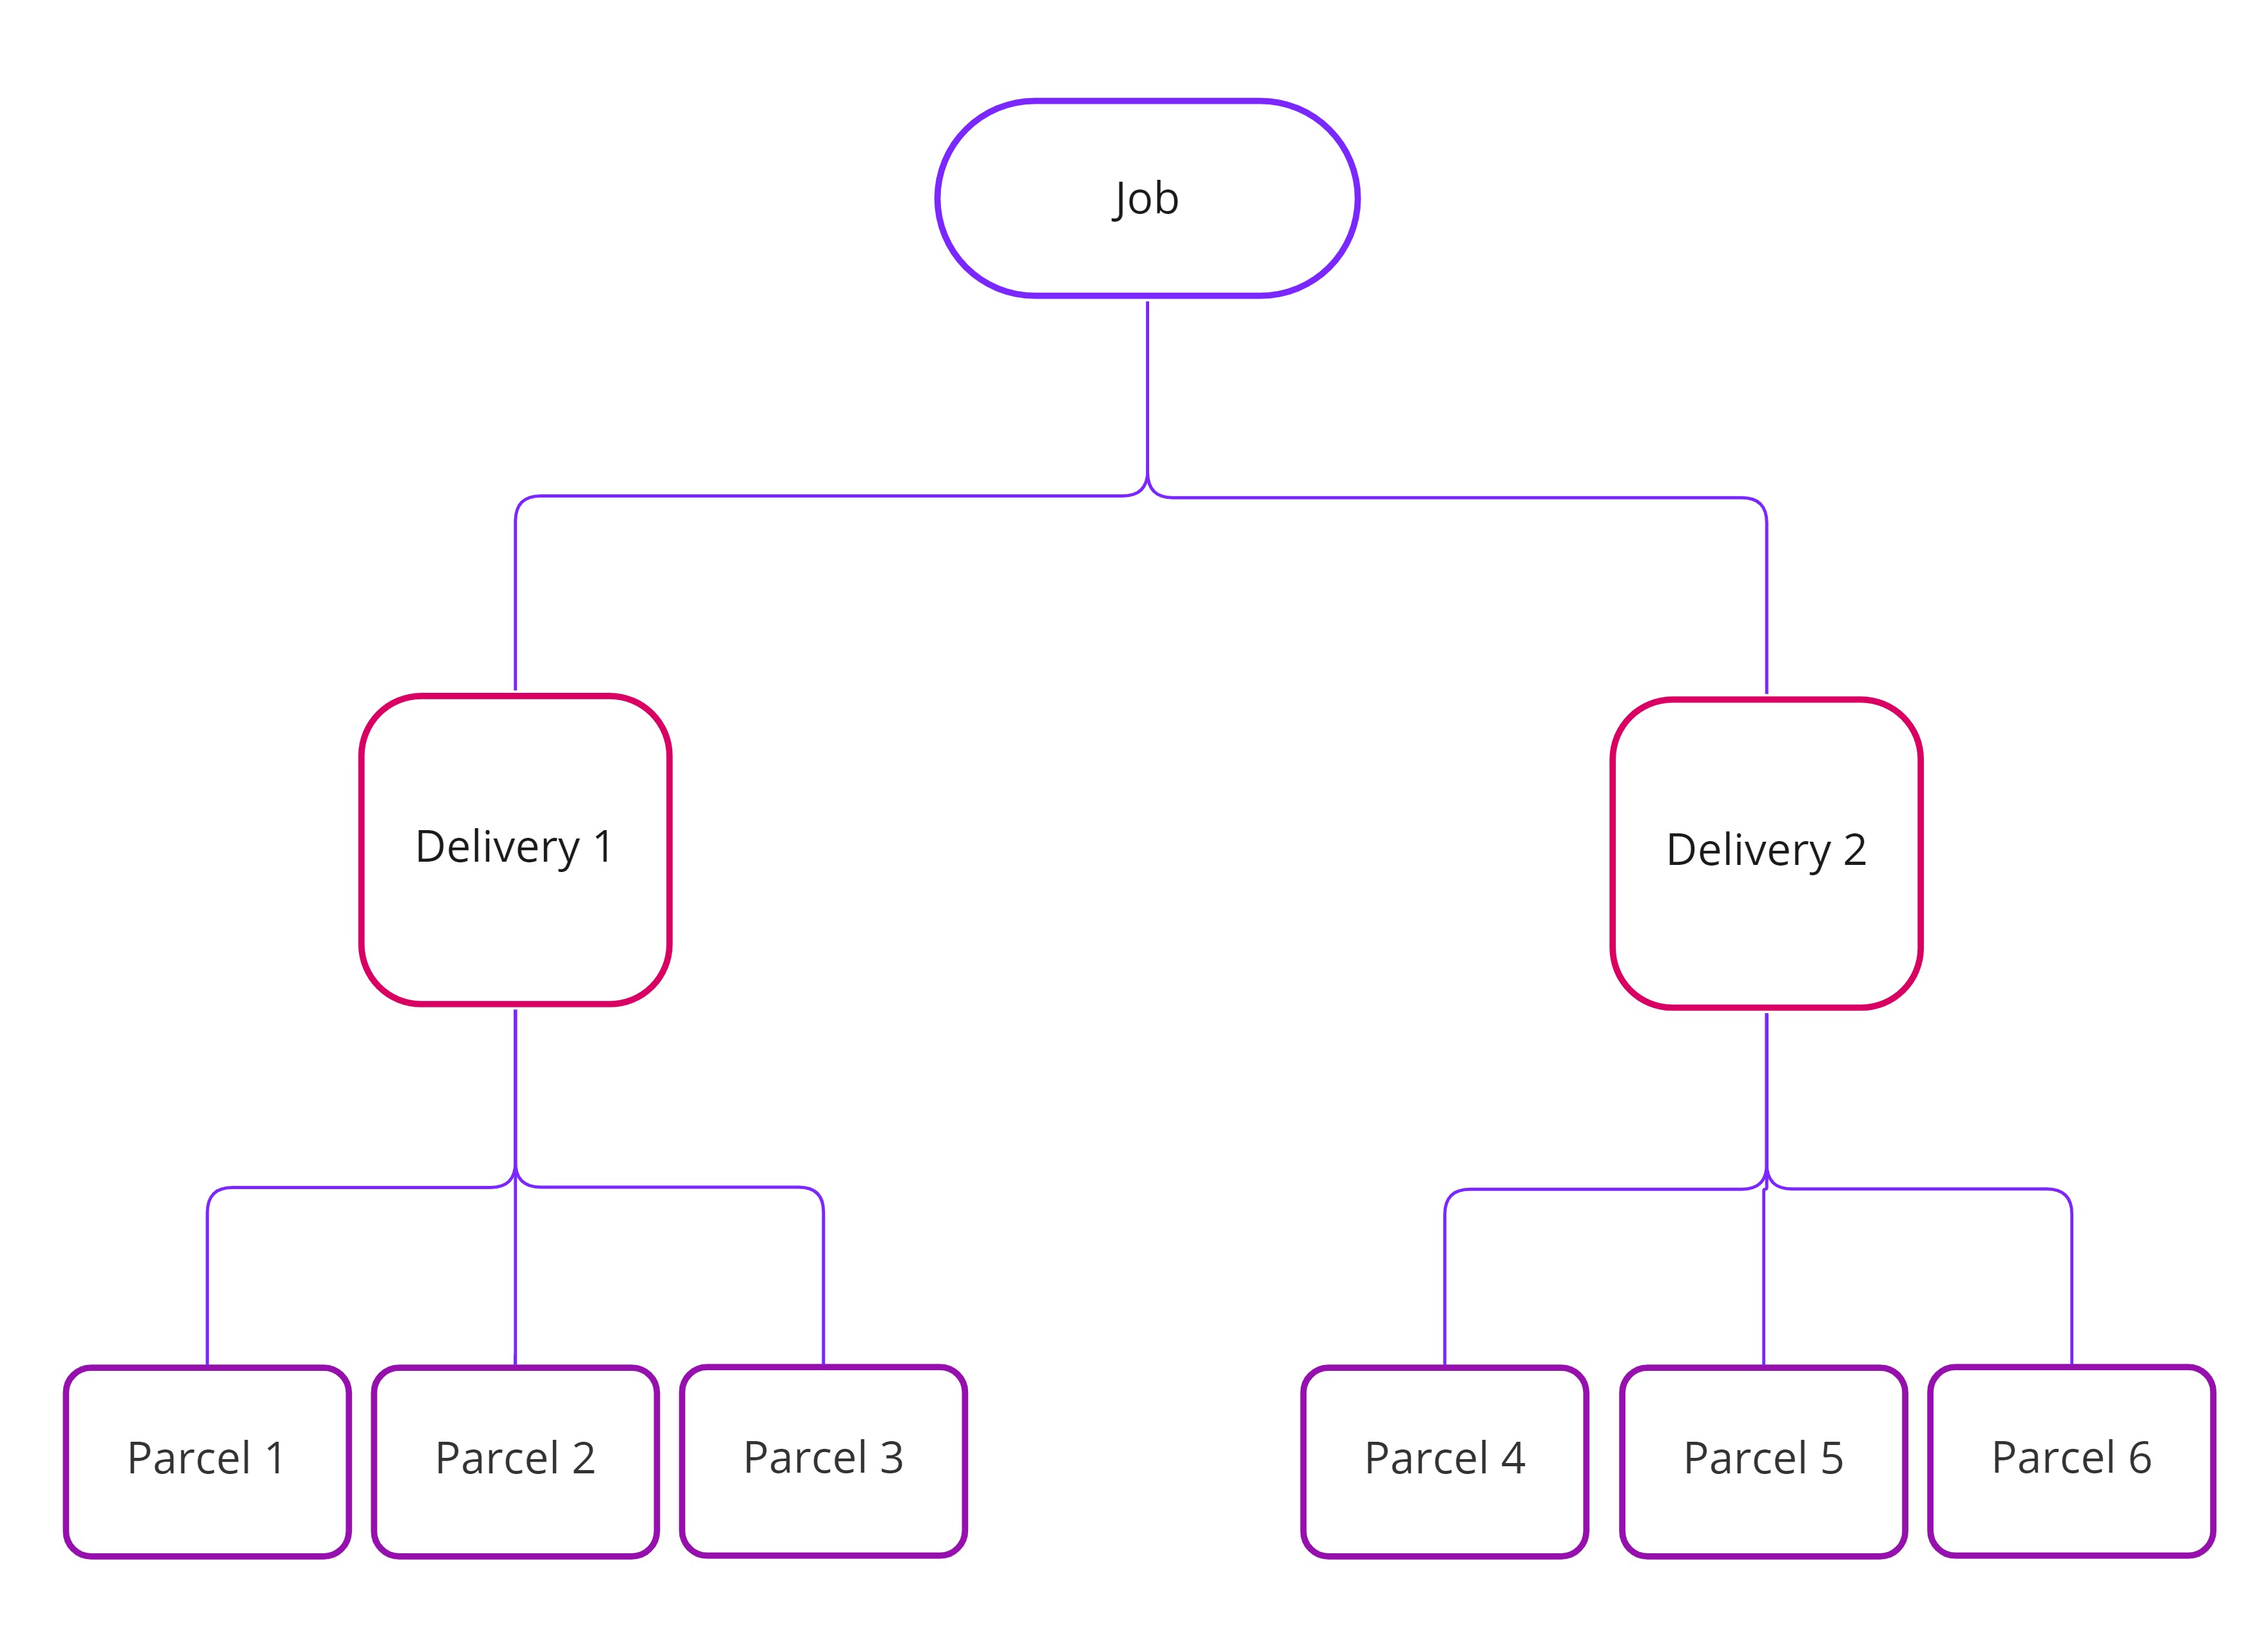 Graphical Representaion of the Relationships Between Jobs, Deliveries and Parcels